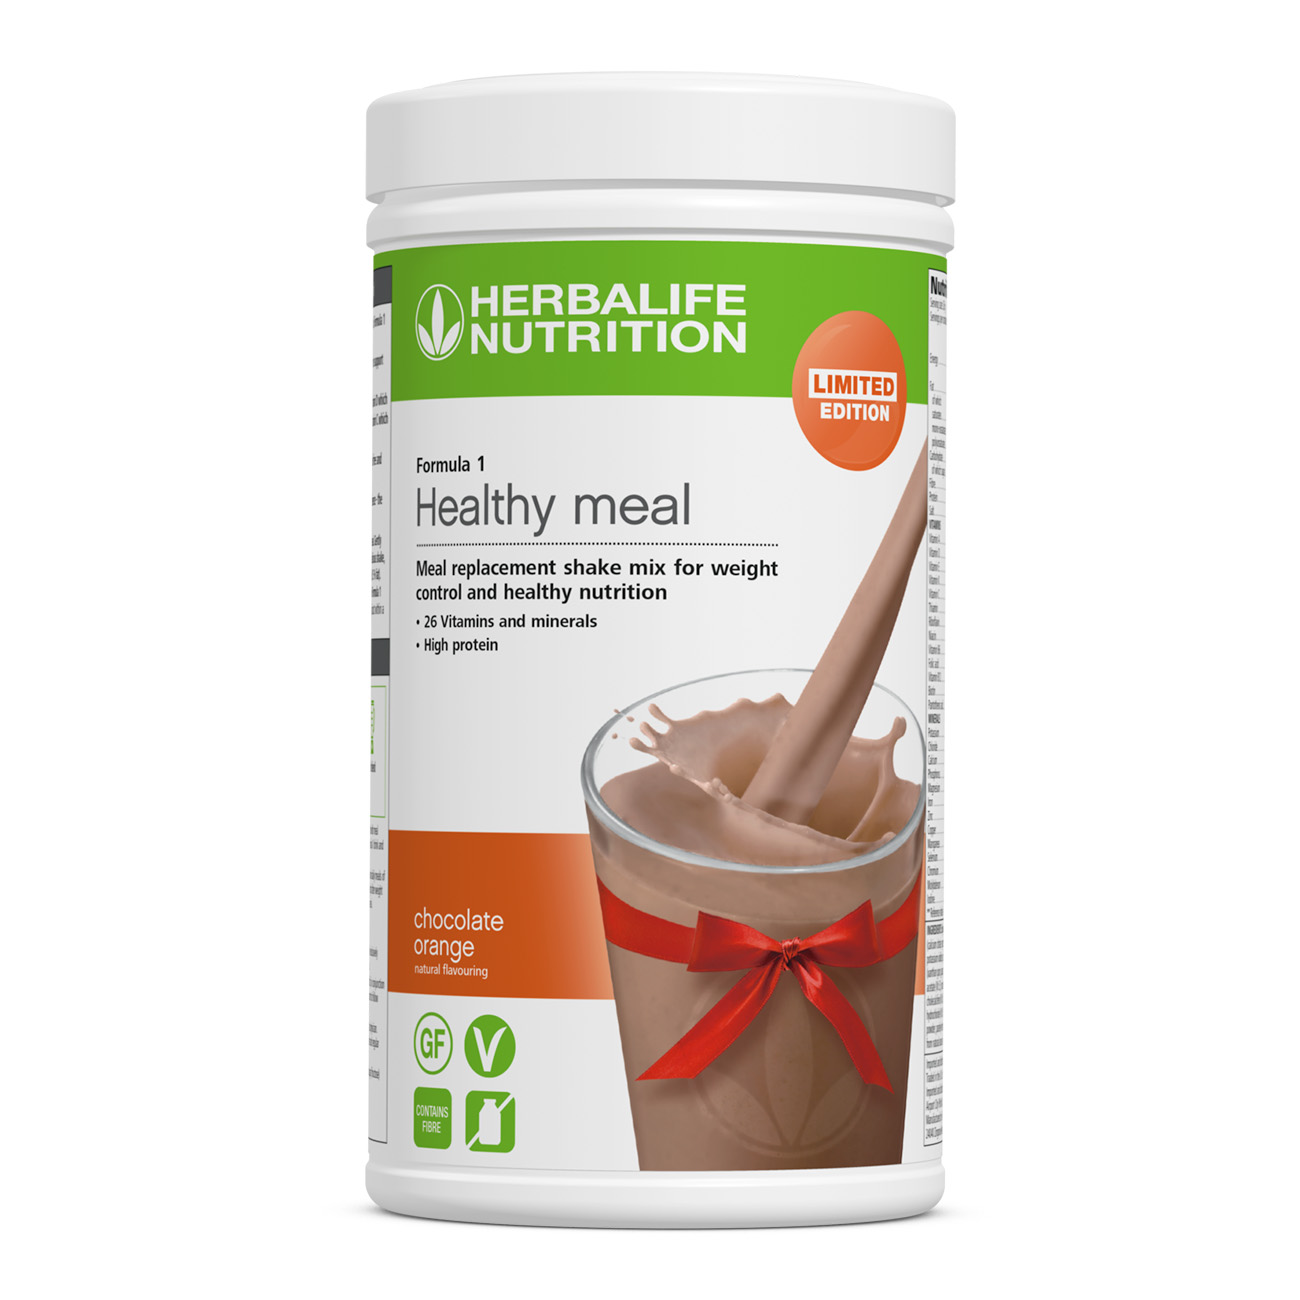 Limited edition F1 Chocolate Orange flavour. It is a healthy meal replacement shake, high in protein and balanced with vitamins and minerals plus fats.